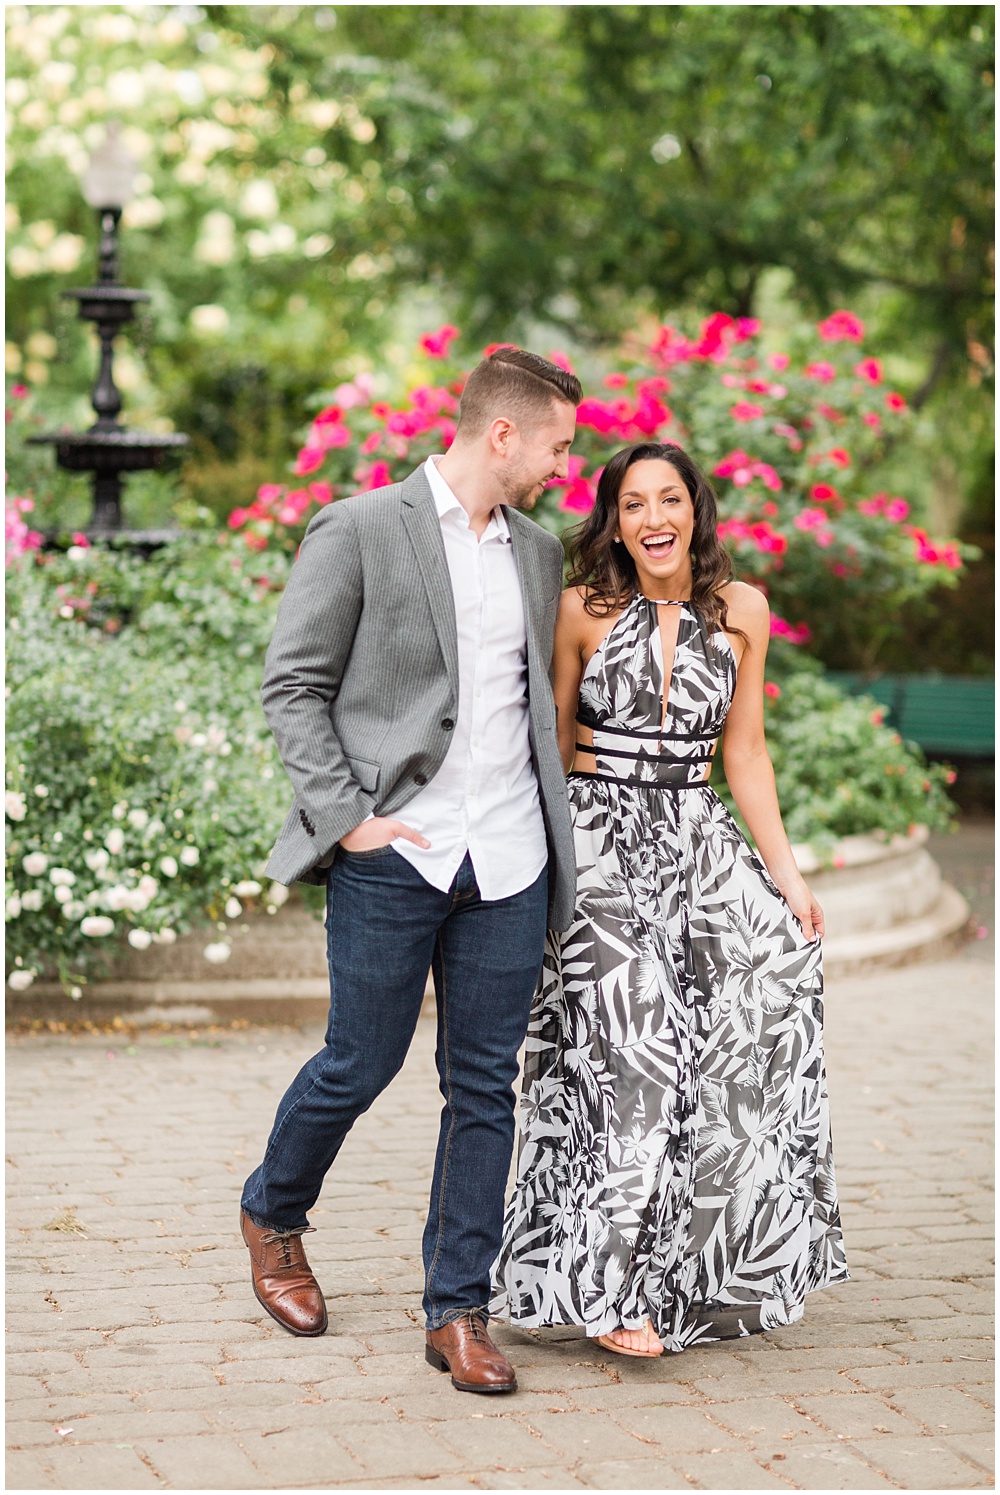 New Jersey, Jersey City engagement photos on a rainy day in Van Vorst Park